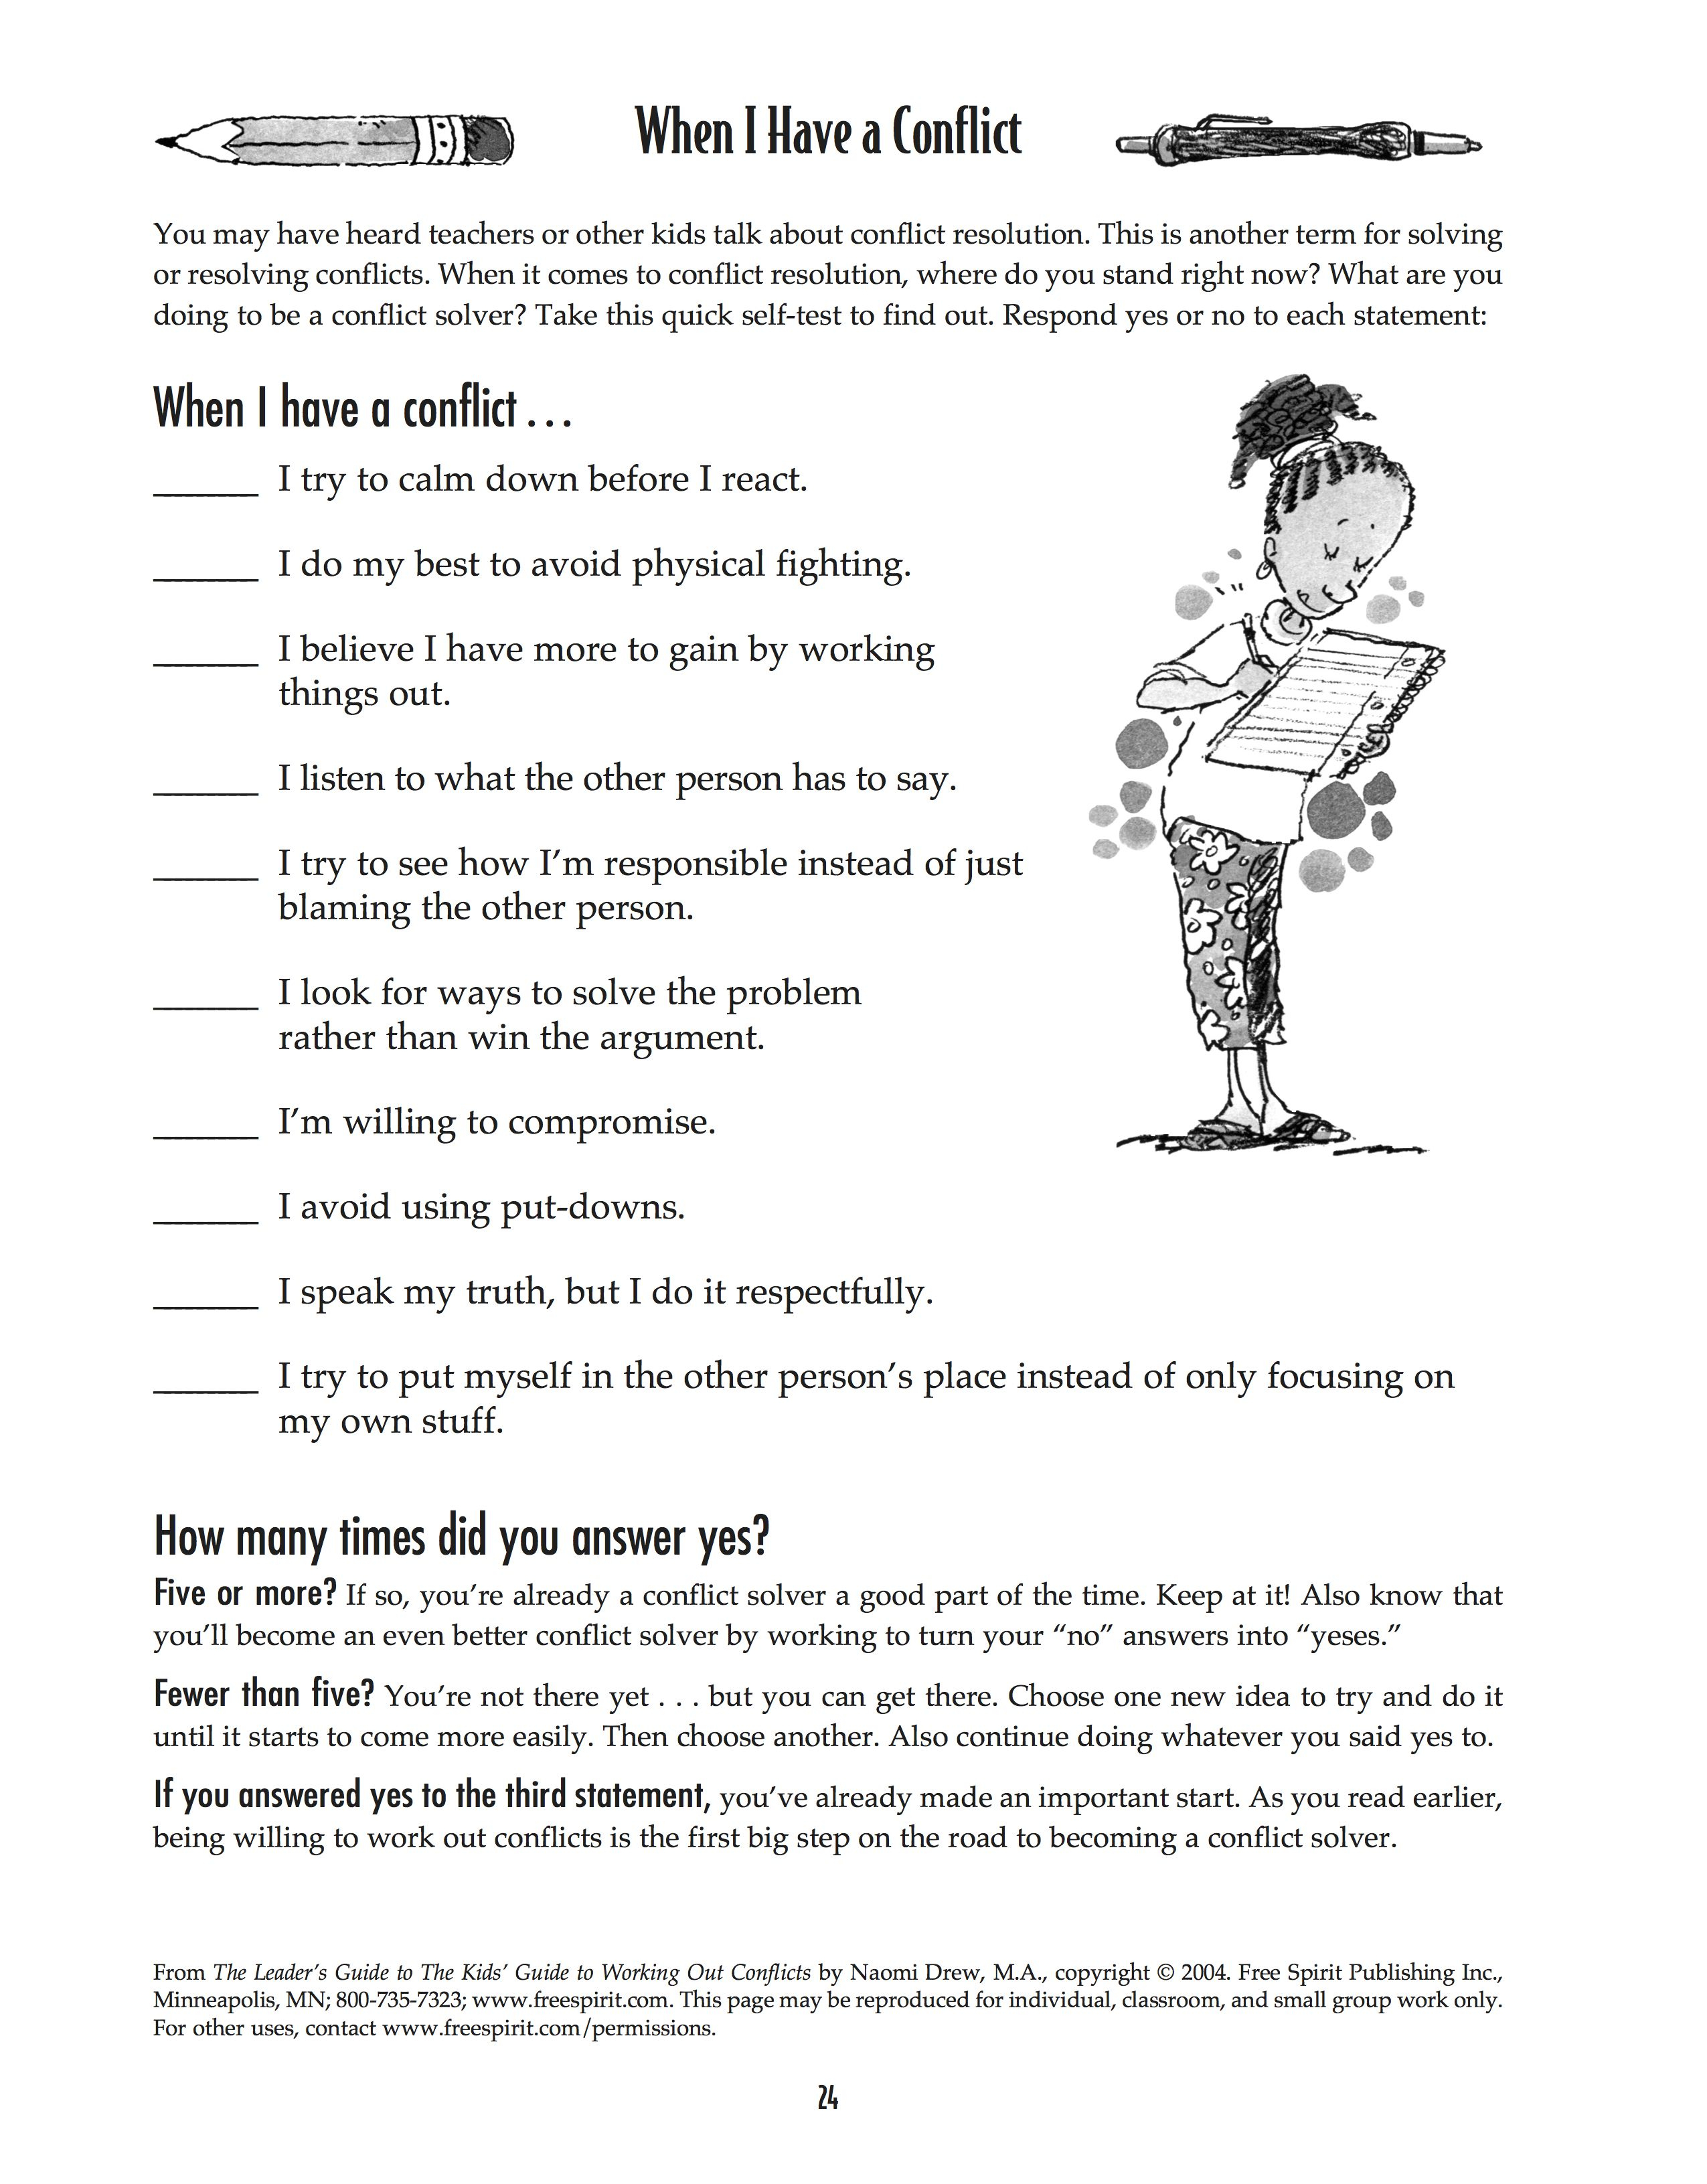 Free Printable Worksheet: When I Have A Conflict. A Quick Self-Test | Free Printable Worksheets For Elementary Students